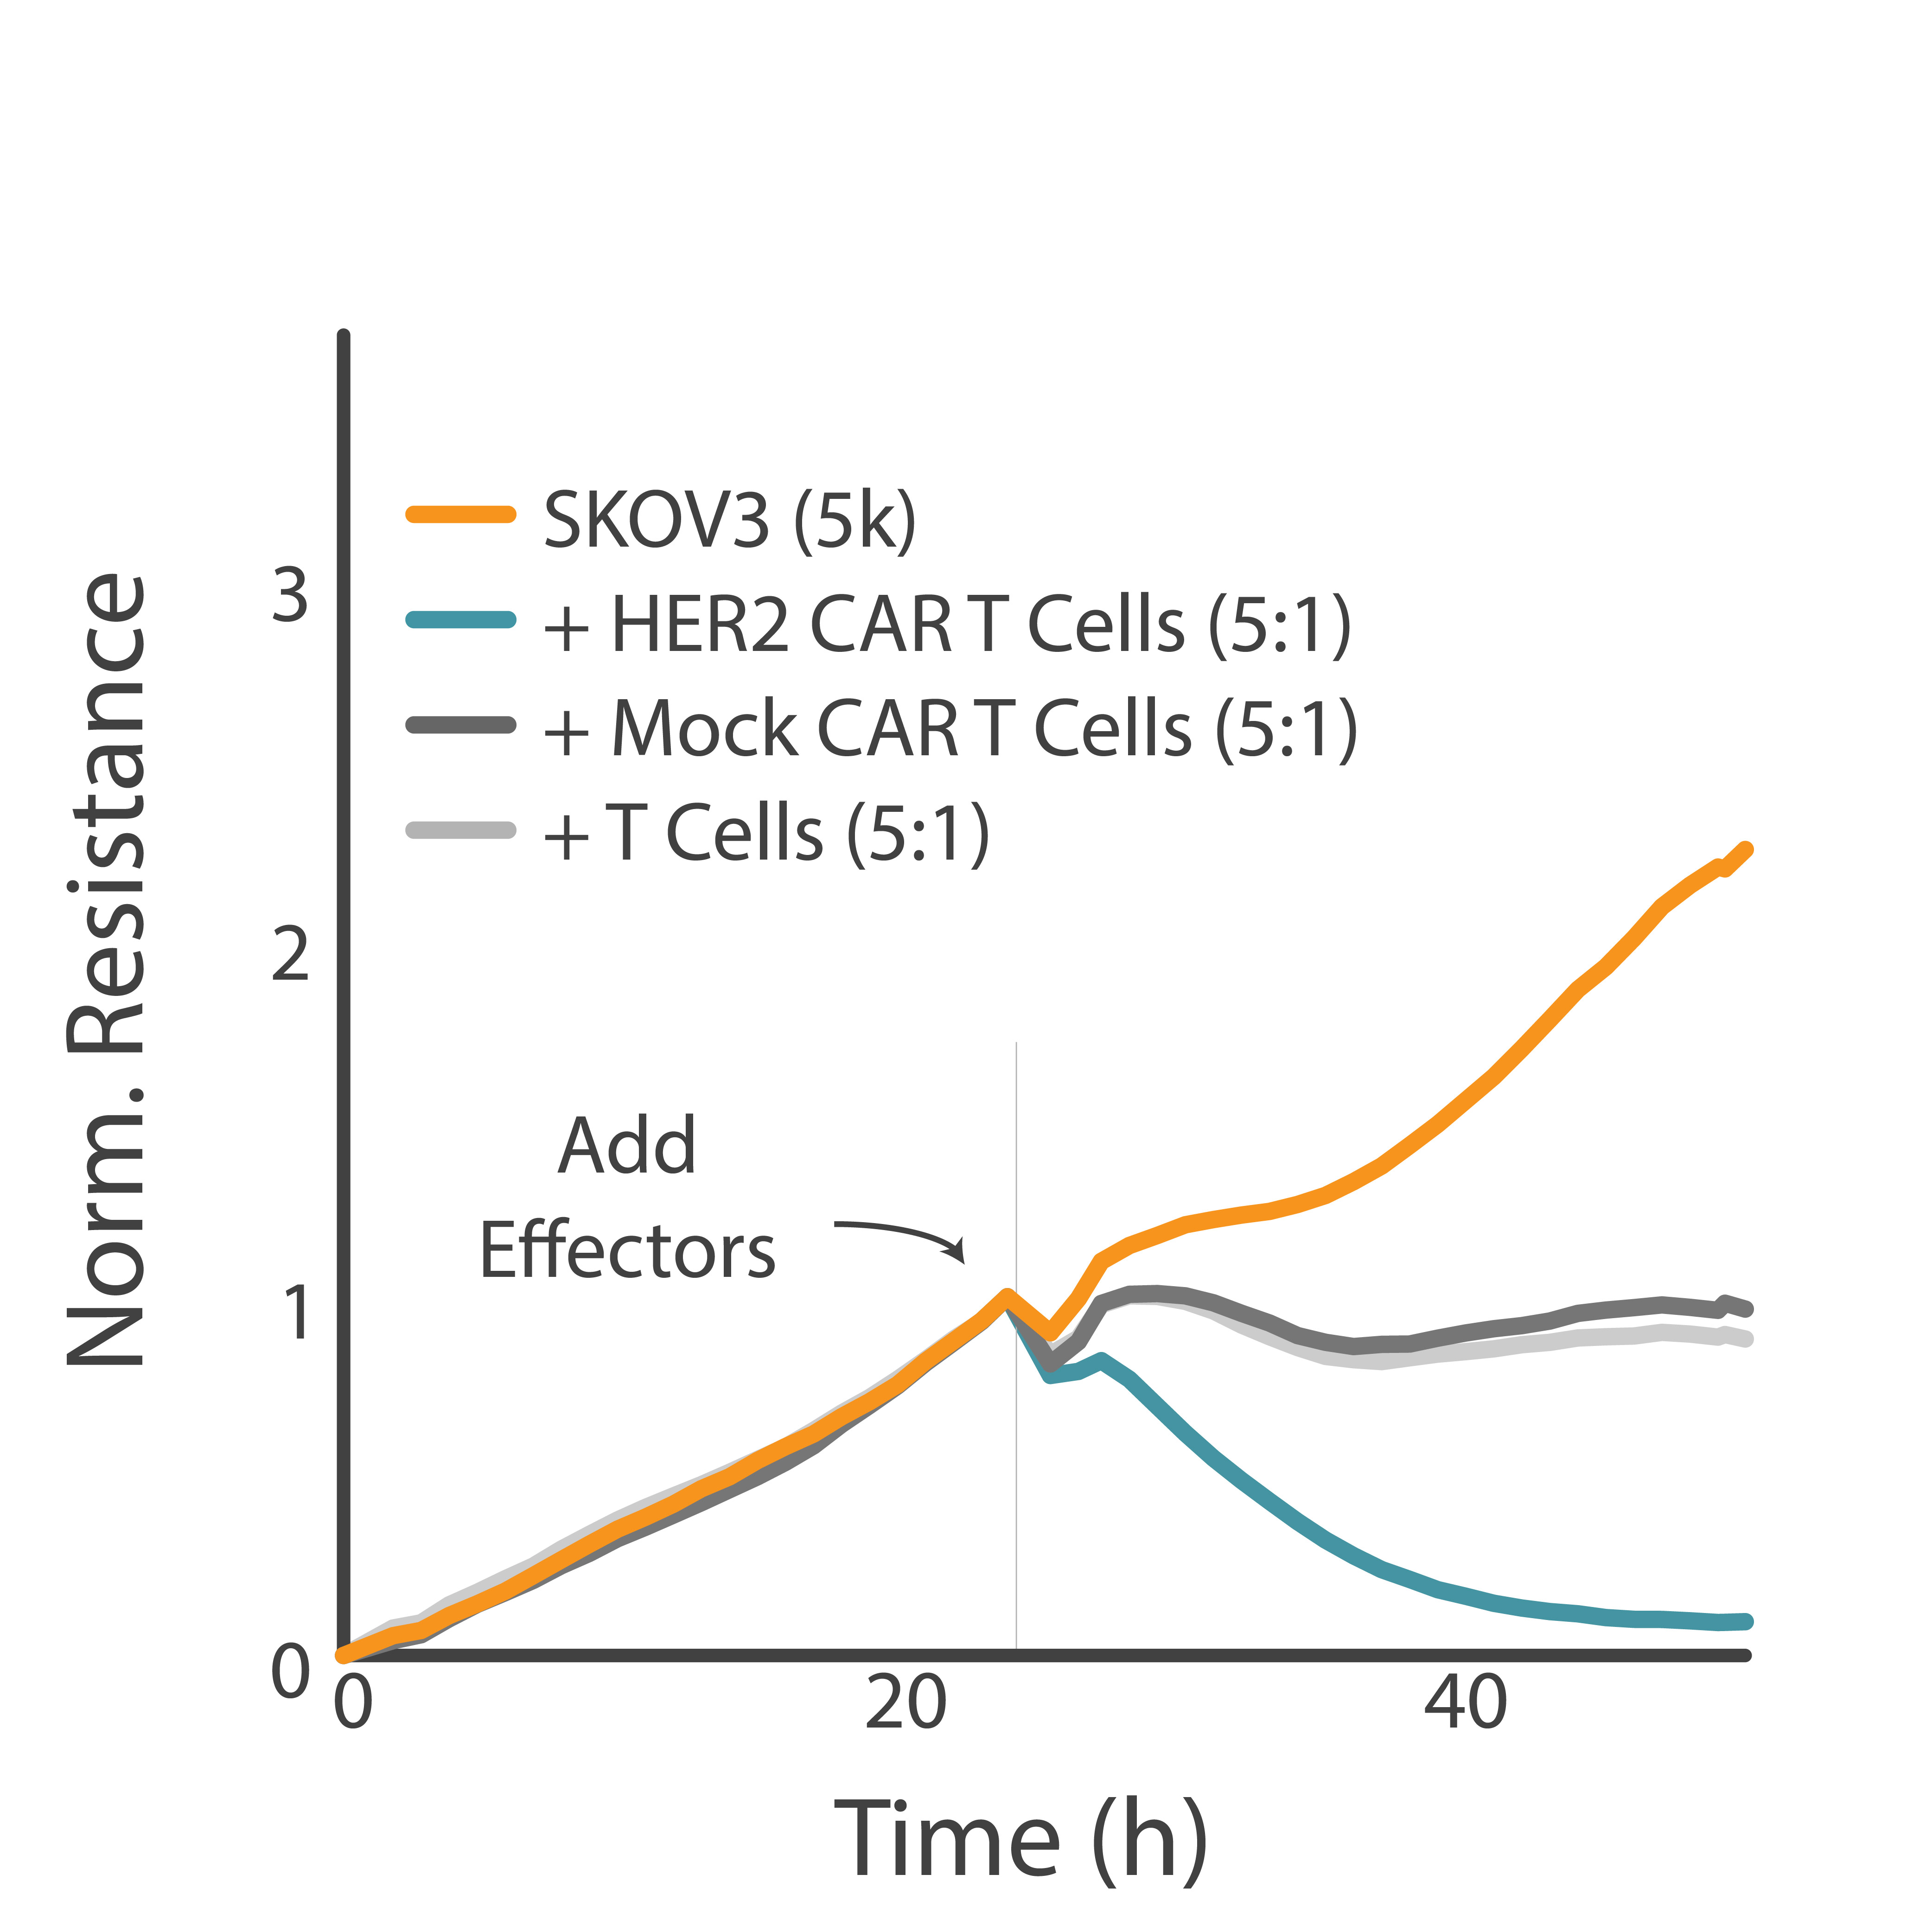 Resistance and cytolysis of target SKOV3 cancer cells by HER2-targetting CAR T cells.